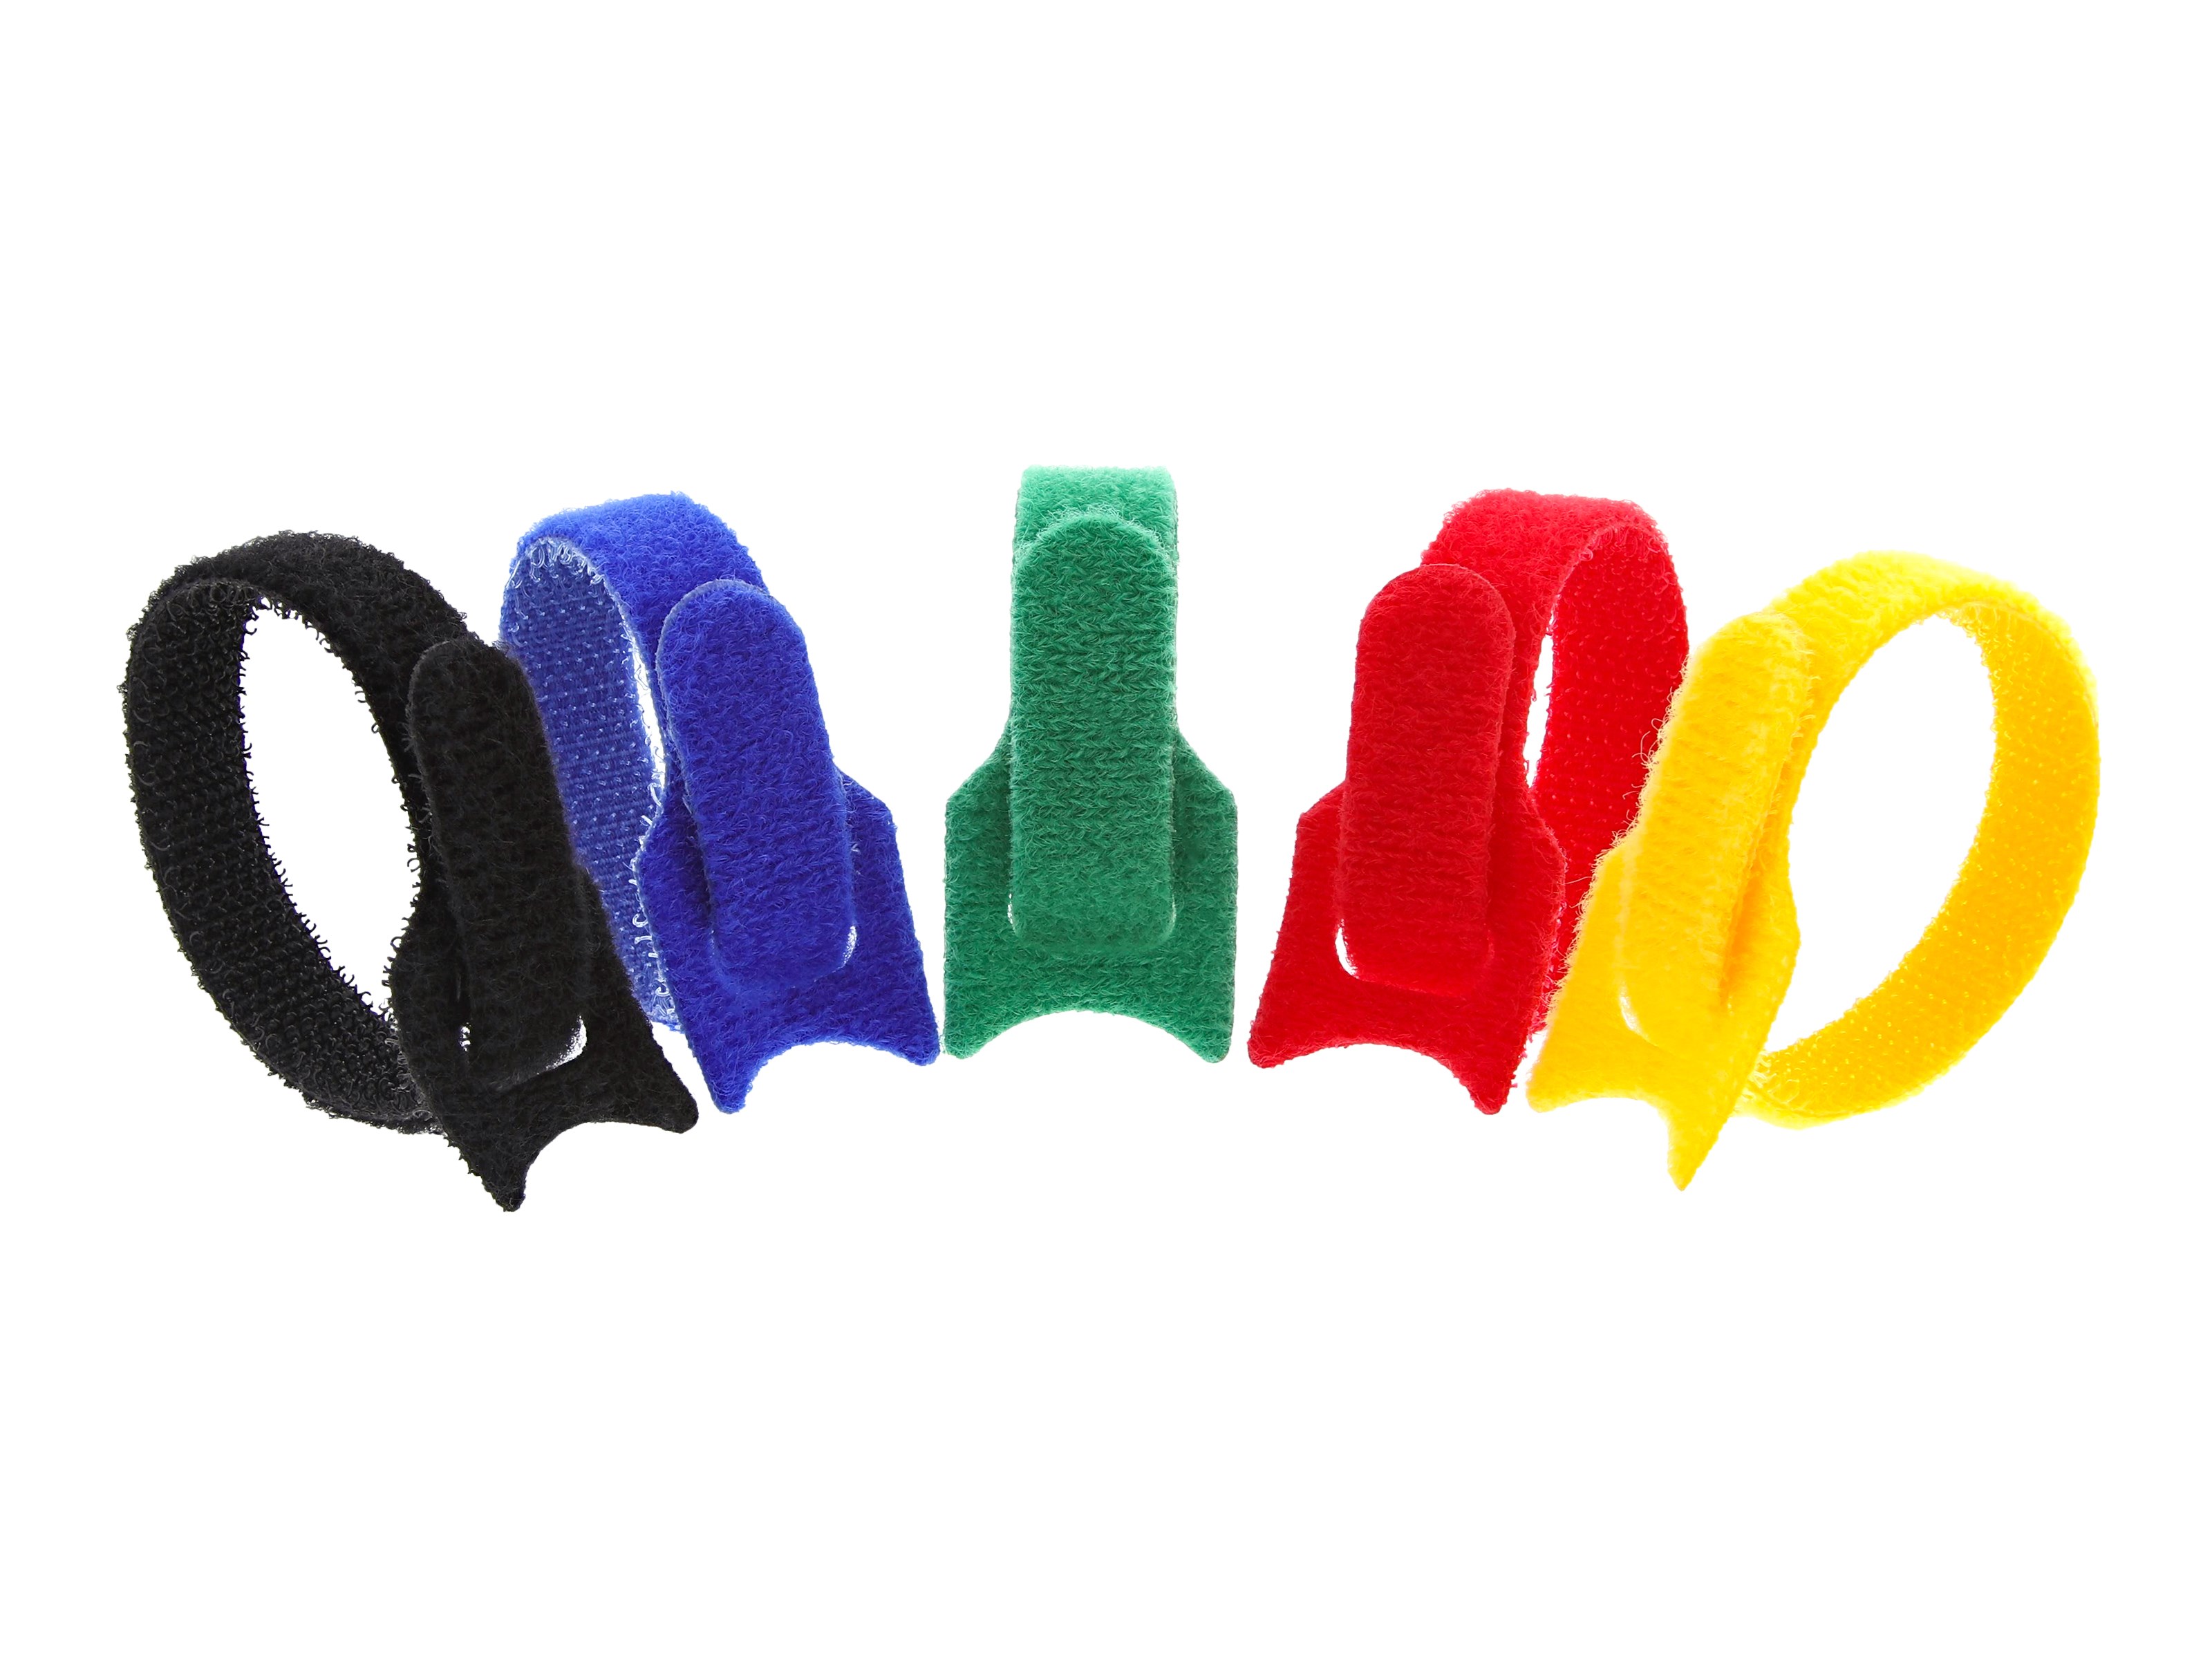 6 Inch Multi-colored Reuseable Tie Wraps - 5 Pack - Secure™ Cable Ties